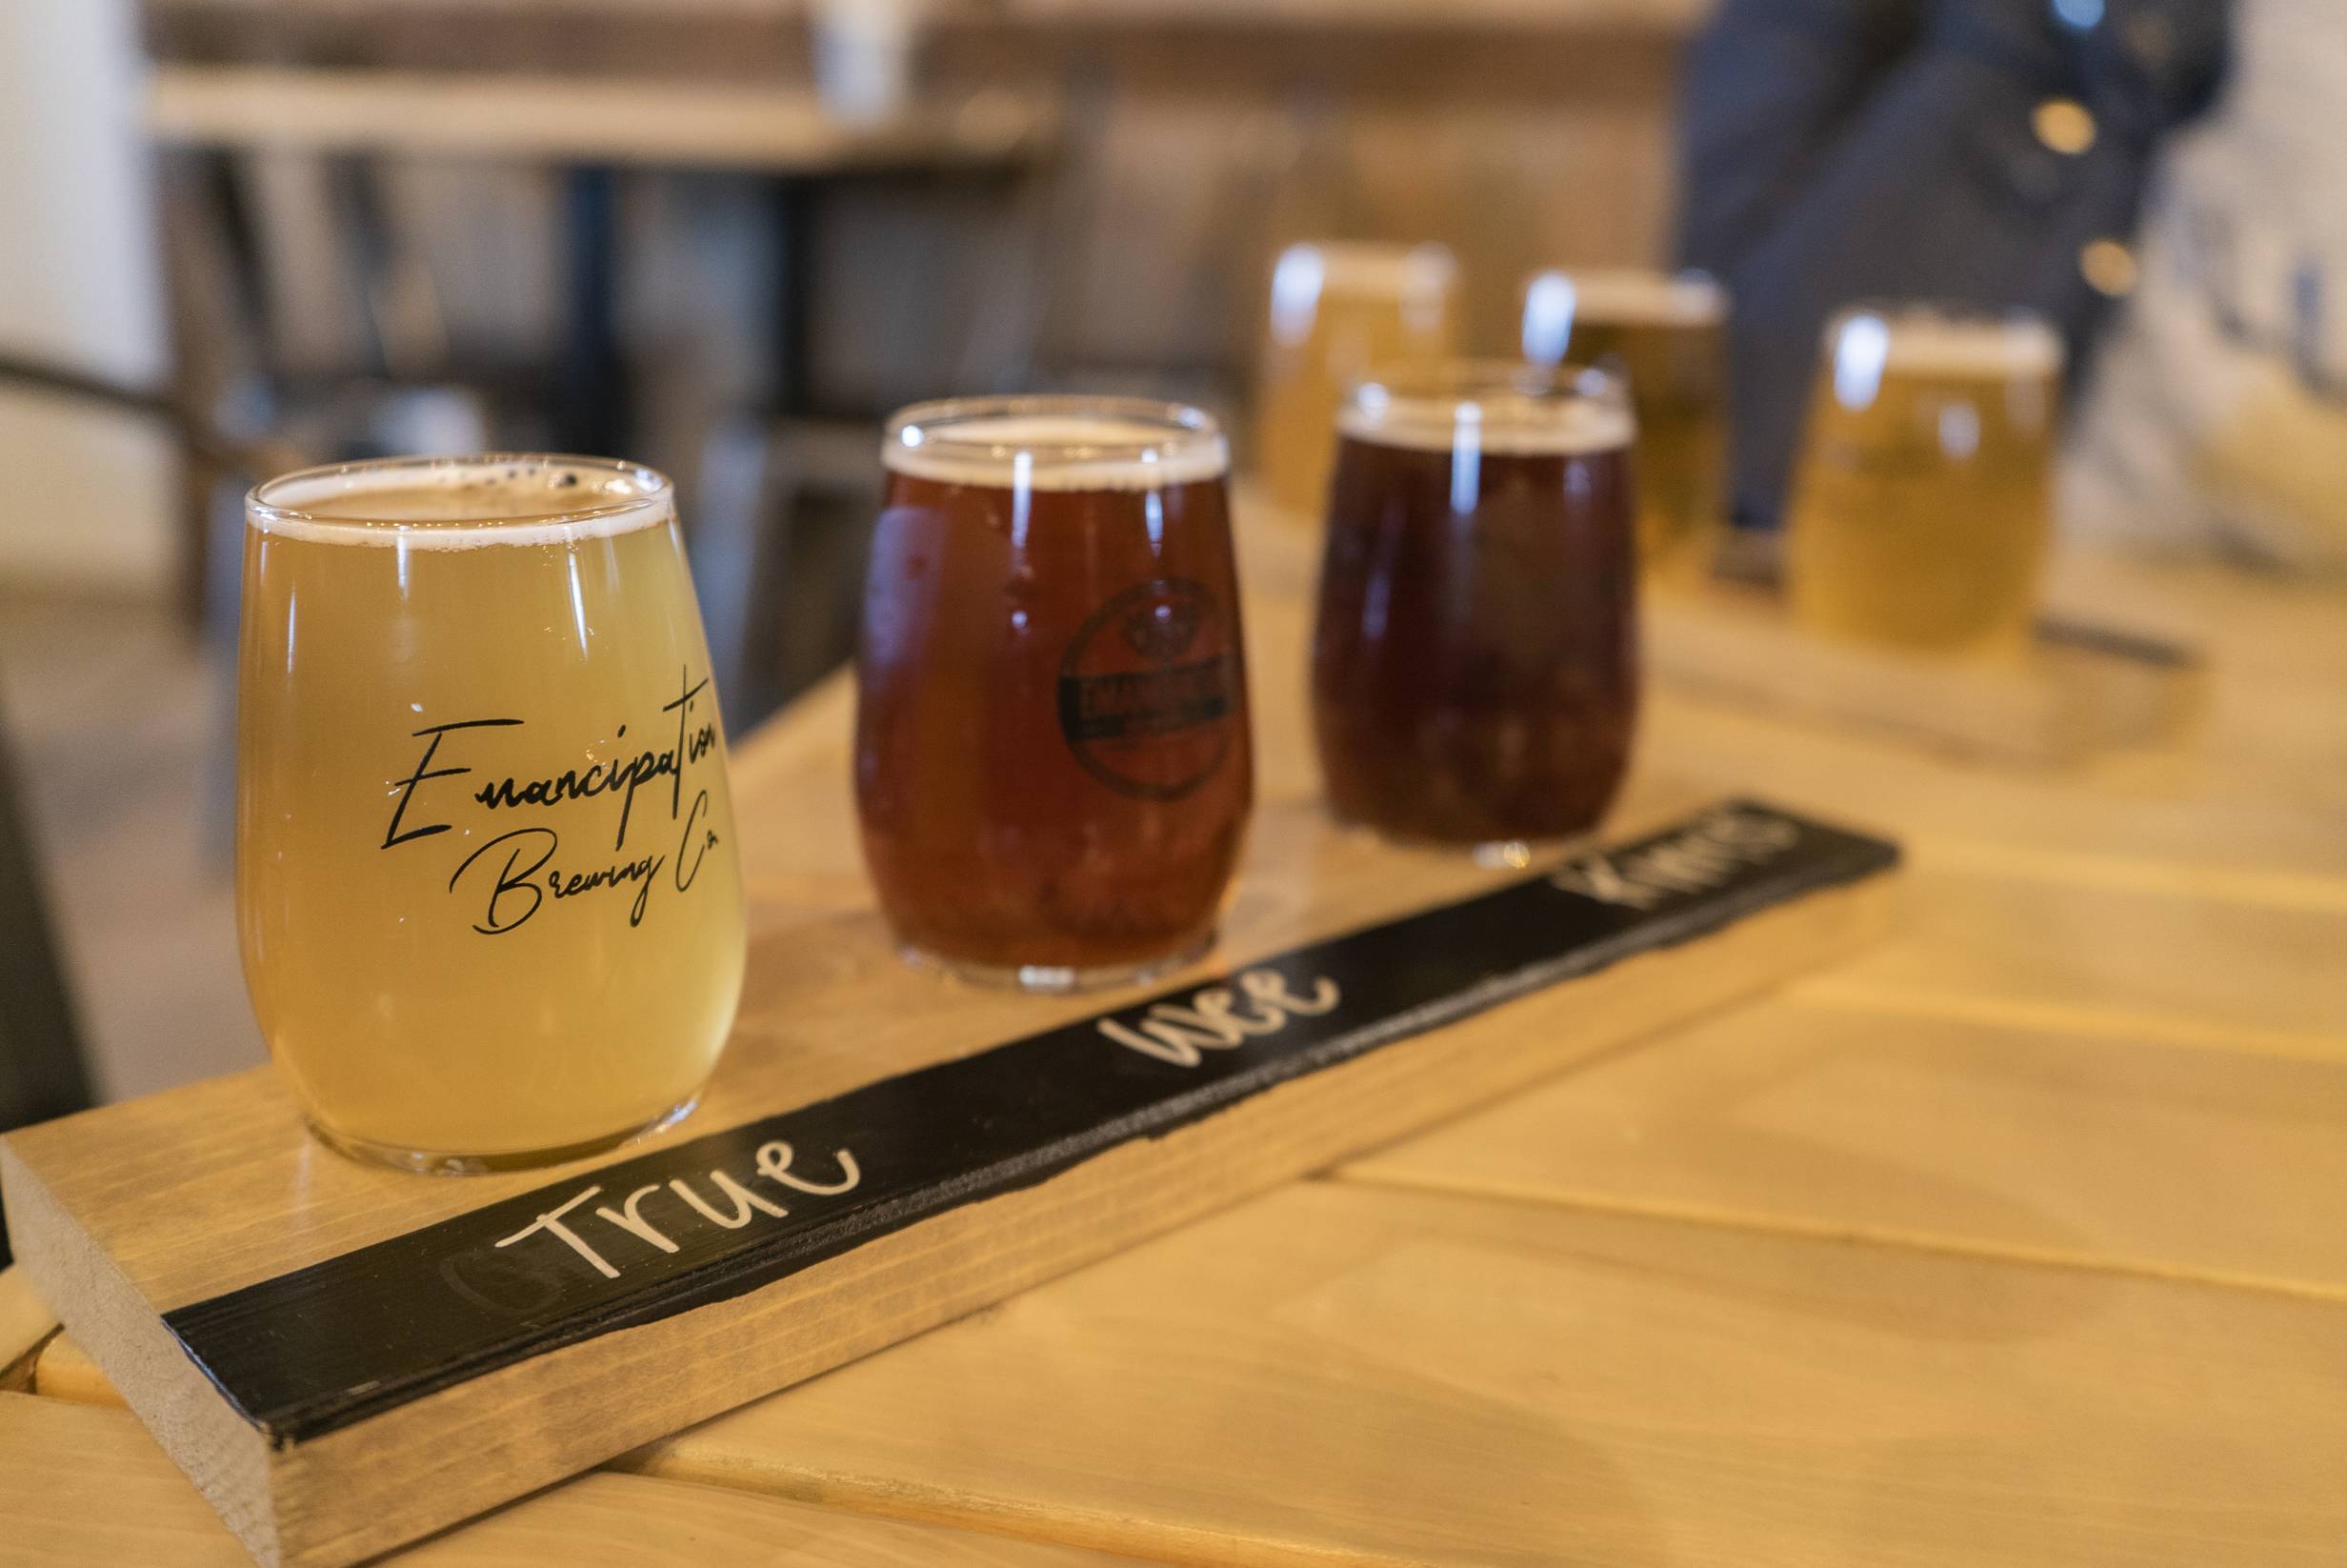 A flight of three beers at Emancipation Brewing. The first beer is light yellow, the second is light brown, and the third is a darker, reddish brown. The serving tray reads 